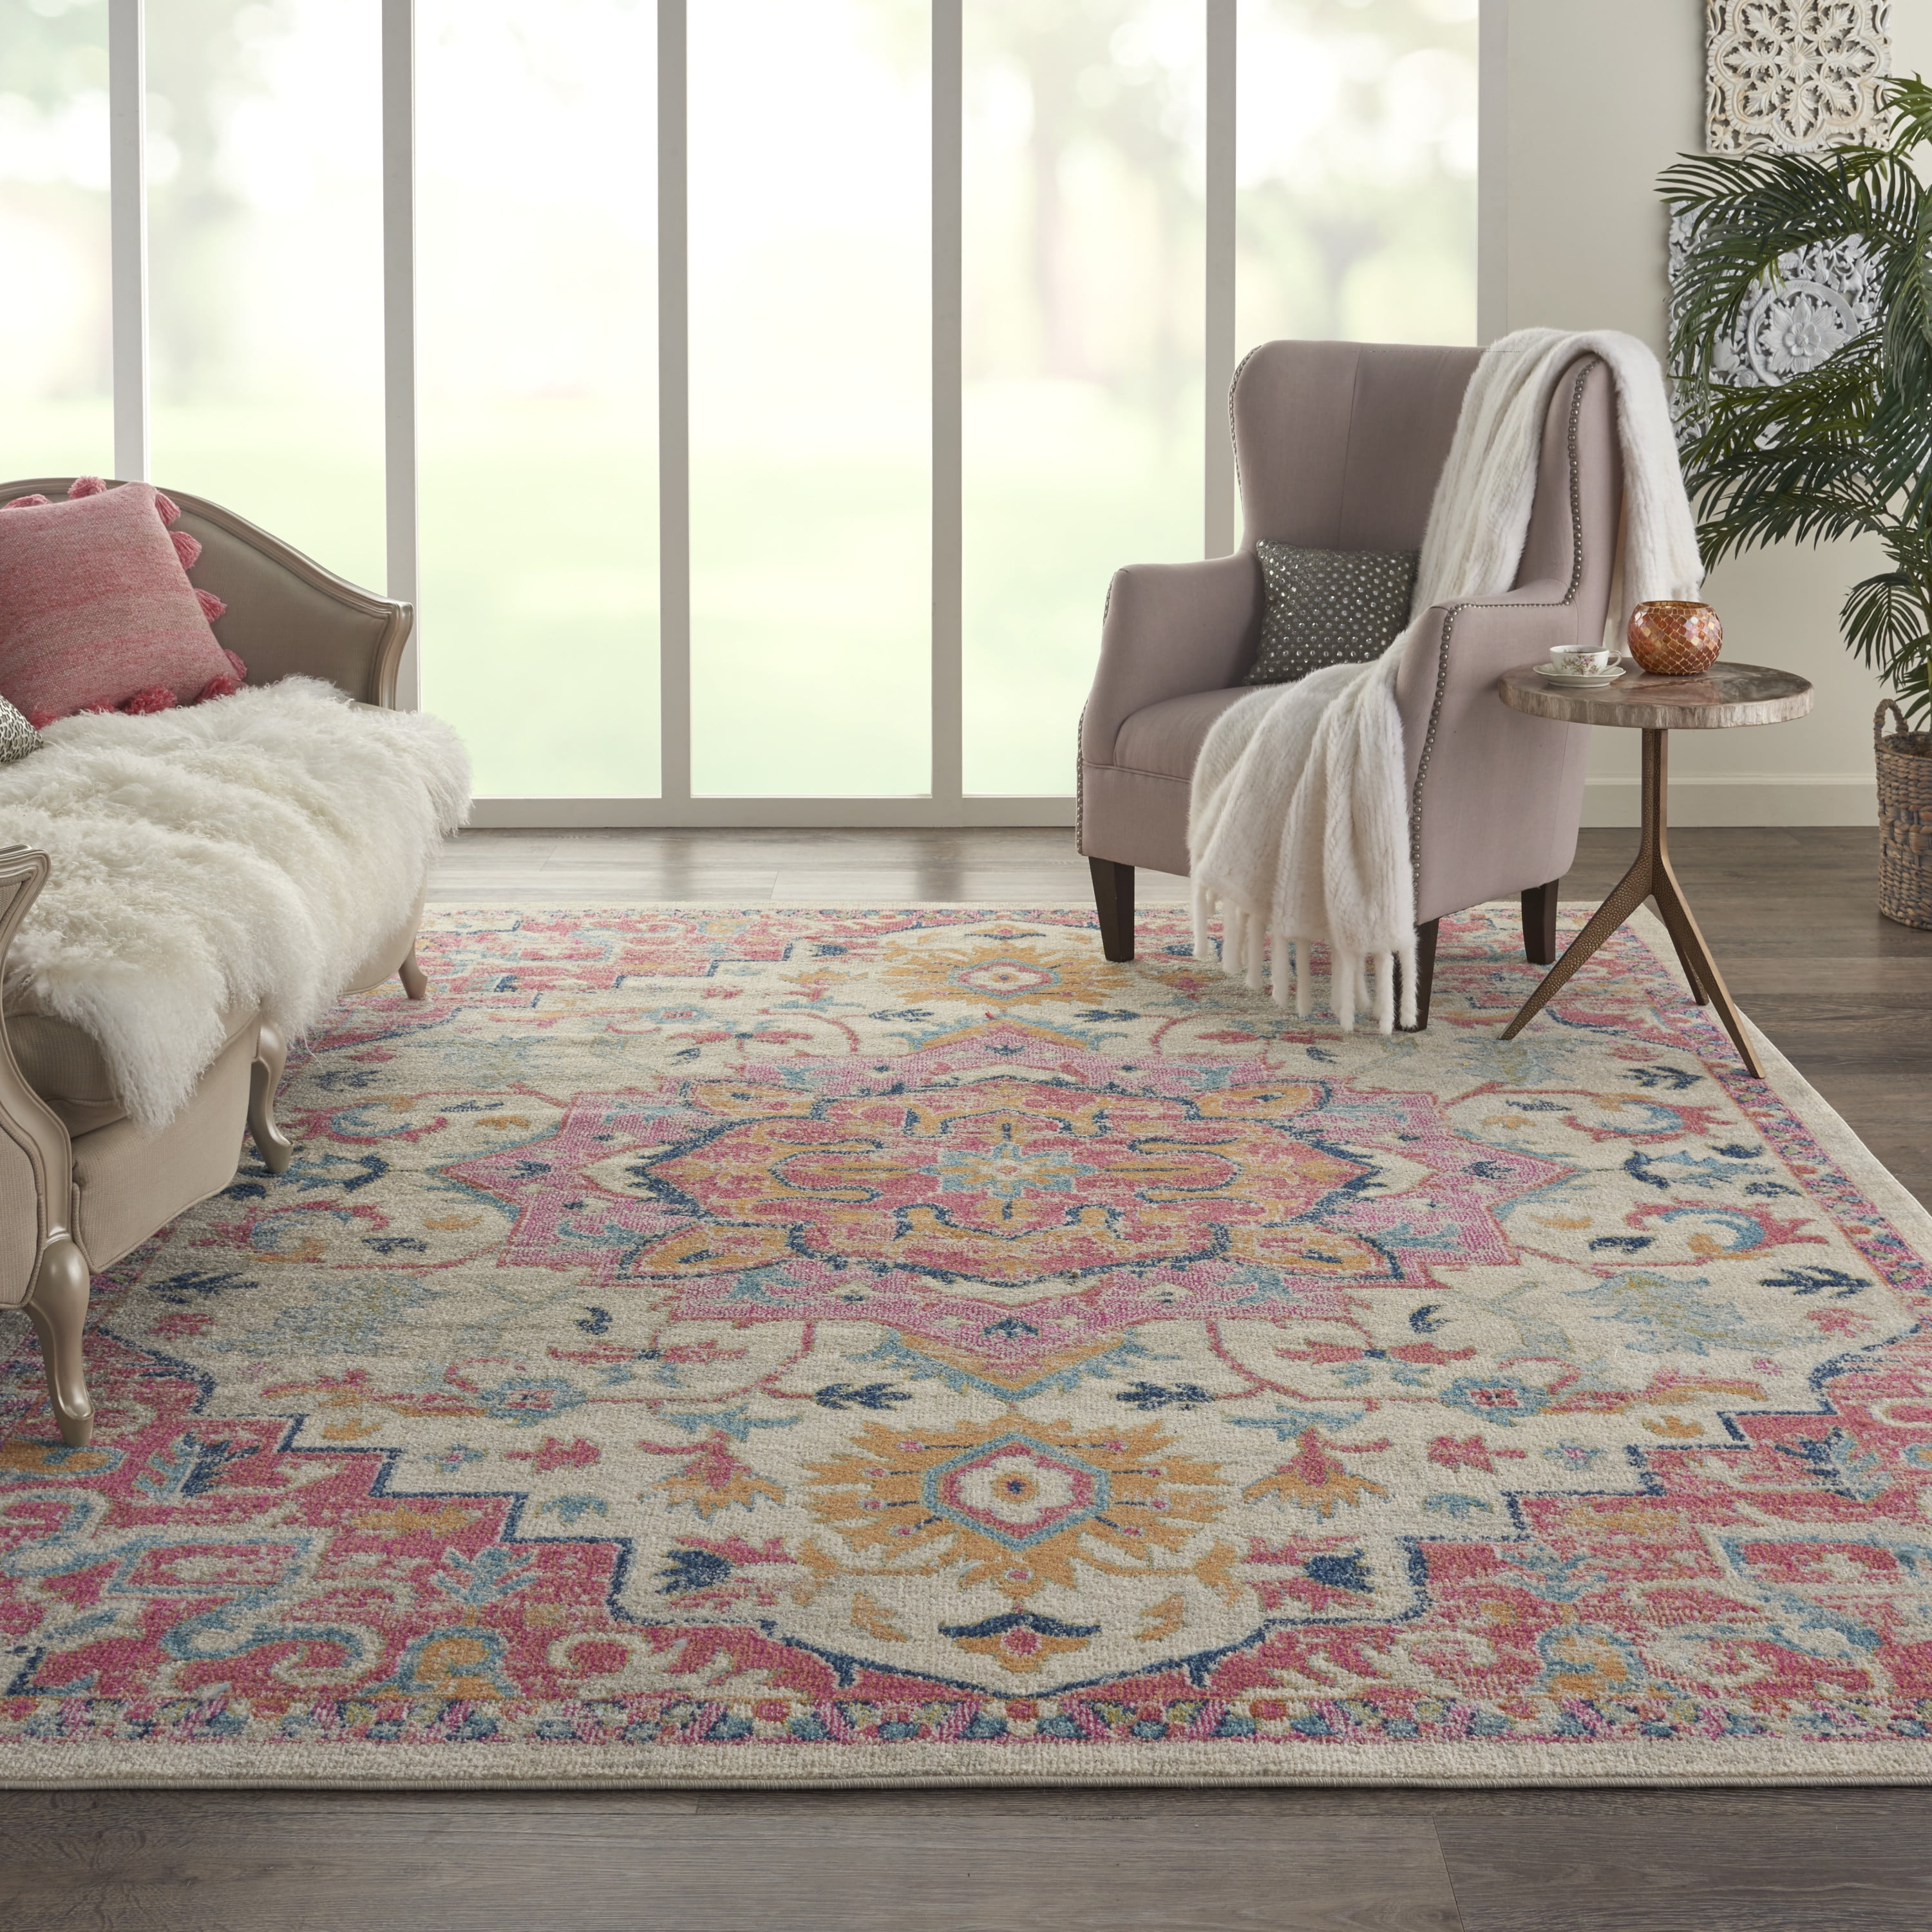 Neutral Decor & Floor Cover 2'2 x 7'6 Runner Bohemian Oriental Medallion Floral Pattern Boho Area Rug Gorgeous Persian Overdyed Powerloomed Soft Polypropylene Fiber Colorful Ivory Blue Area Rug